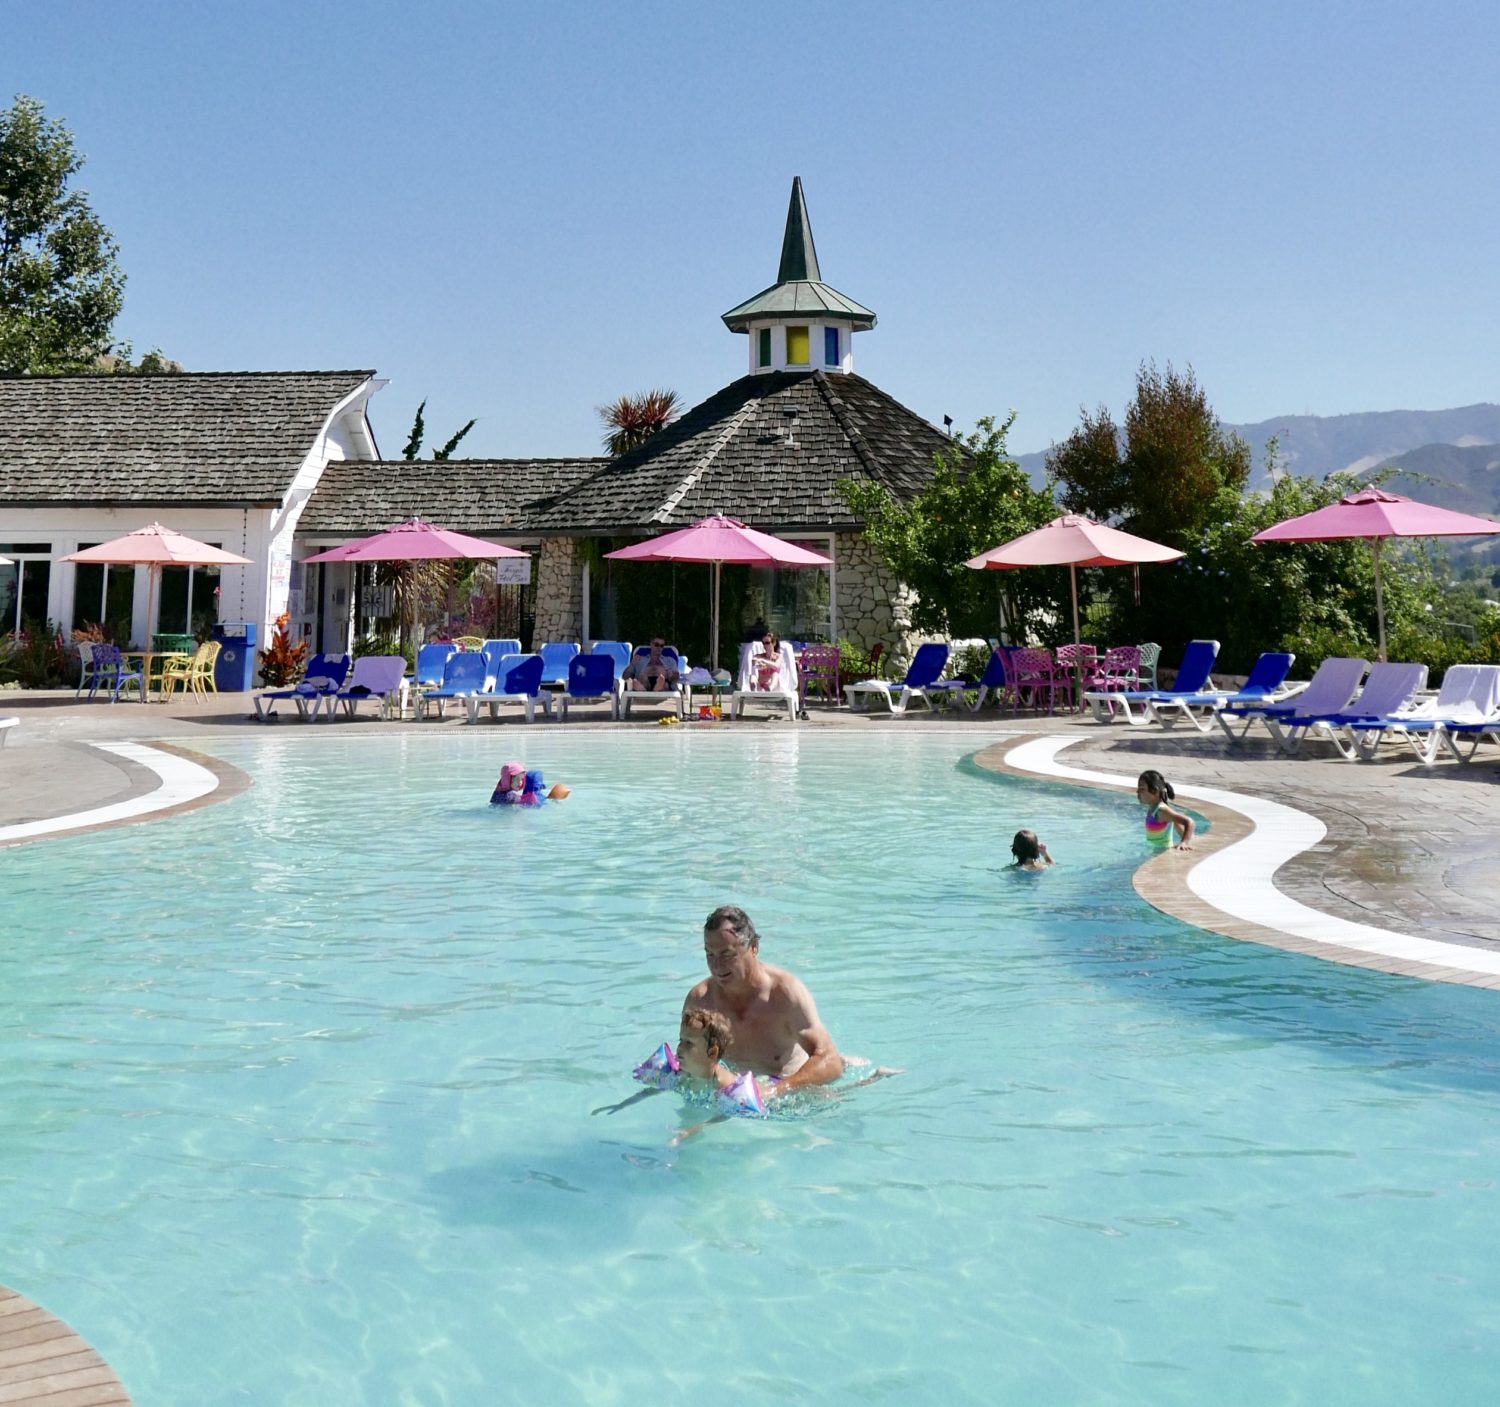 The Madonna Inn, a swimming pool with people in it.